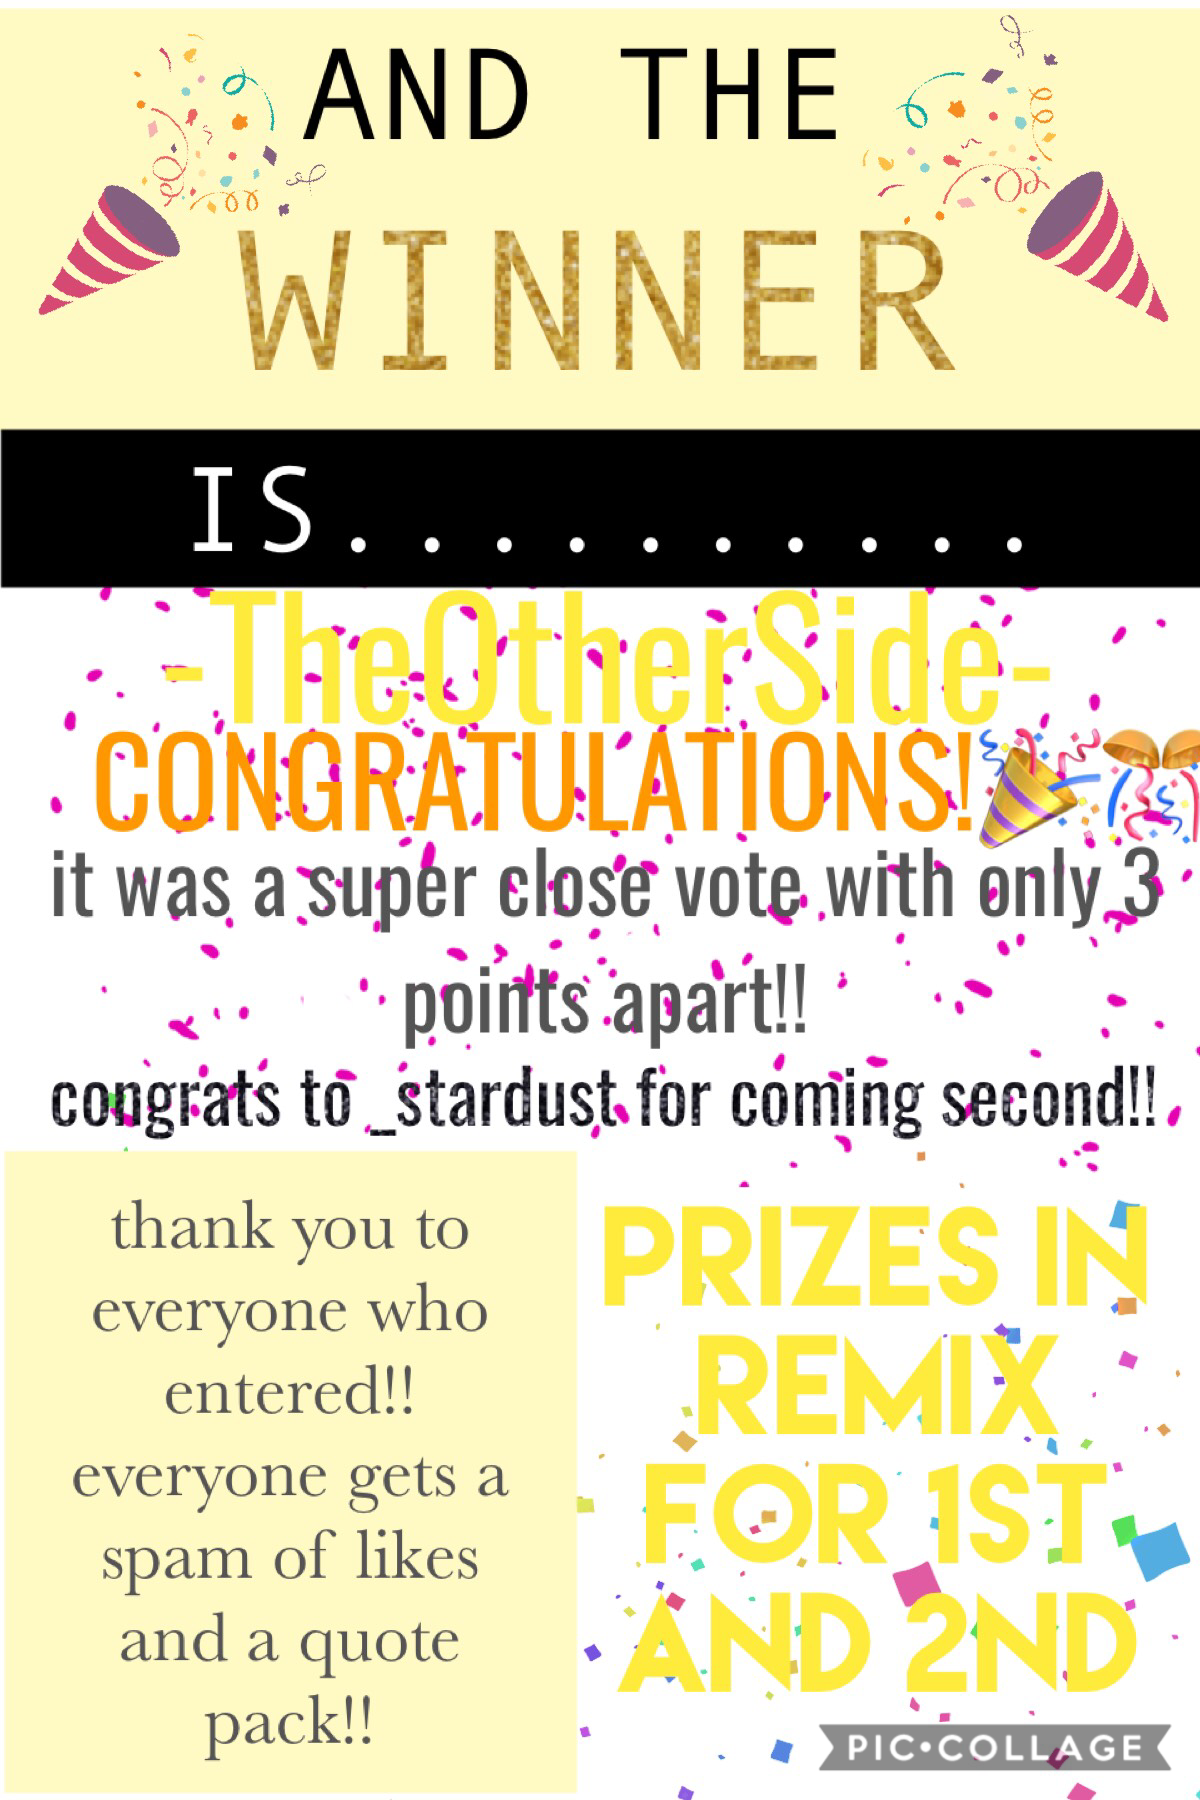 CONGRATULATIONS TO -TheOtherSide- for winning the battle of the collagers!! Congrats to team sunshine flowers 🌻!! Congratulations to _stardust for coming second! good job shining stars✨!! prizes for everyone!! THANK YOU SO MUCH FOR PARTICIPATING!!❤️